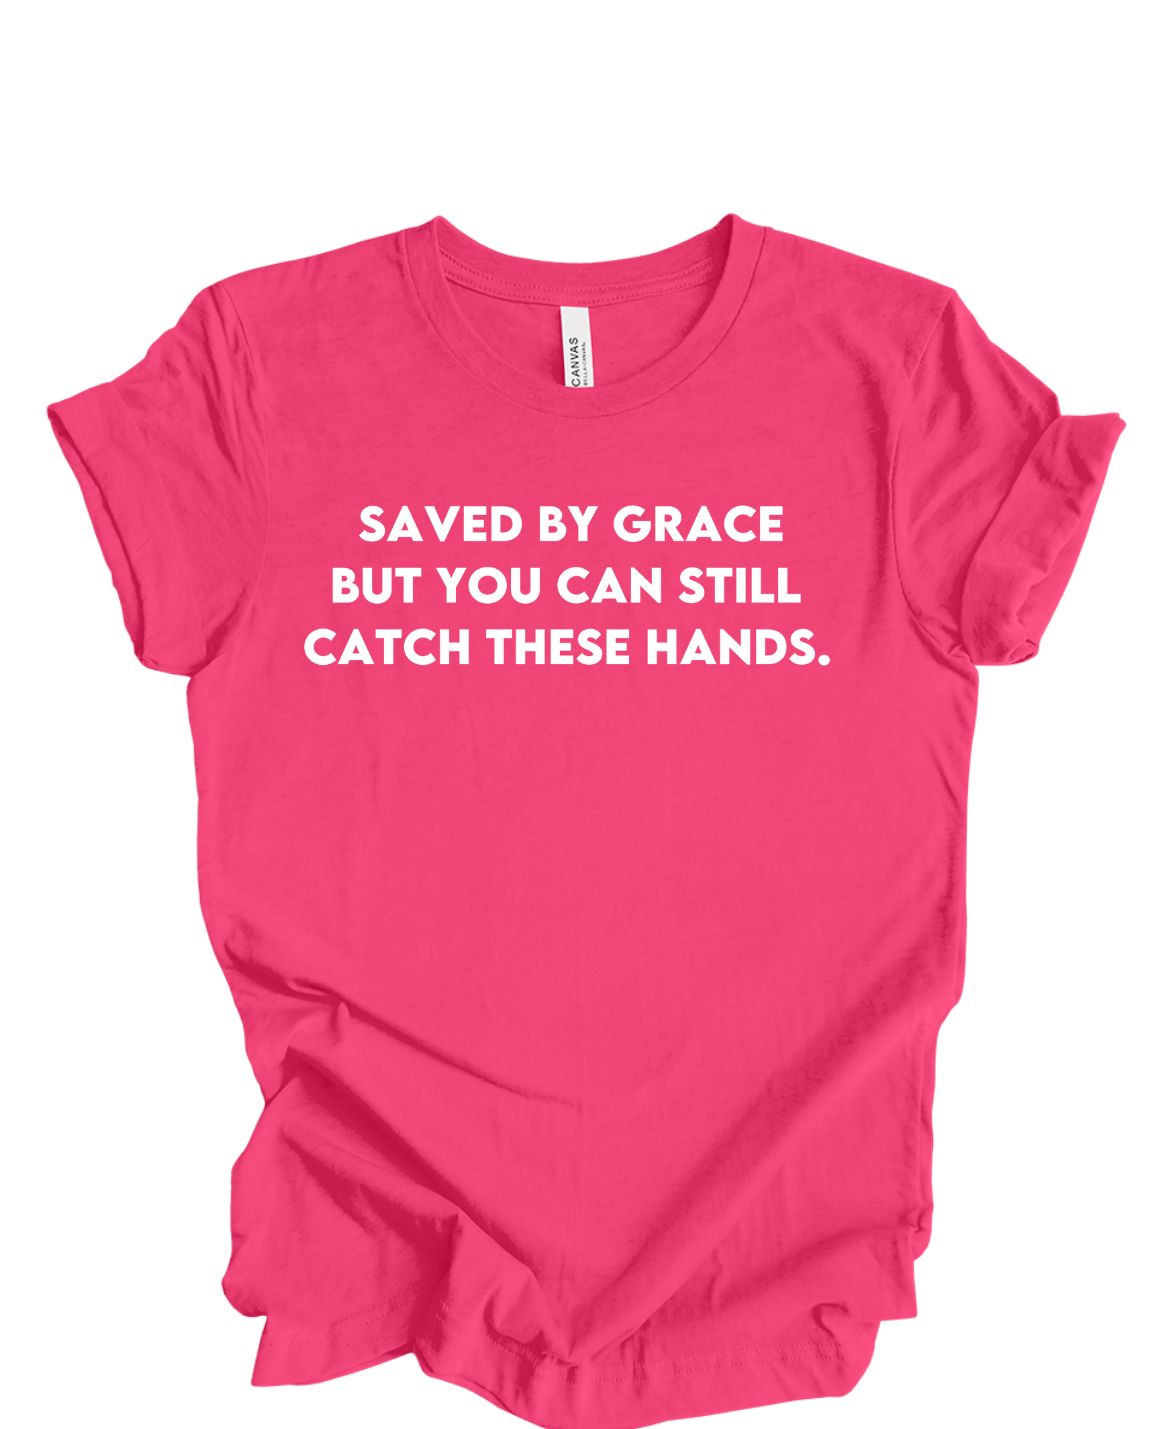 Save by grace- But you can still catch these hands T-shirt